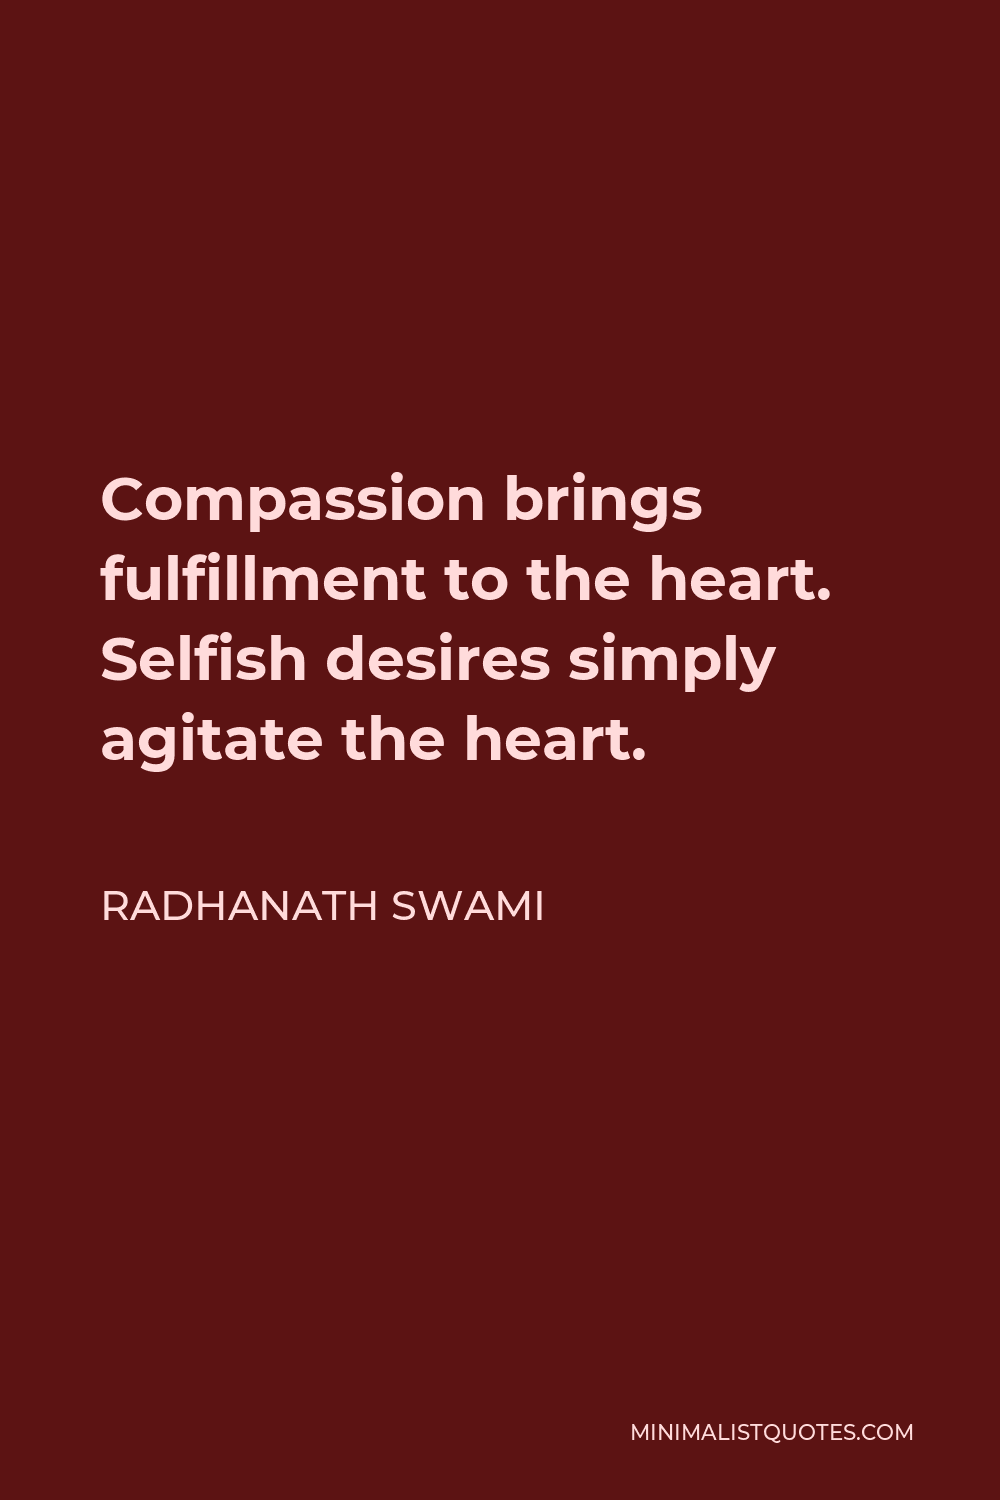 Radhanath Swami Quote - Compassion brings fulfillment to the heart. Selfish desires simply agitate the heart.